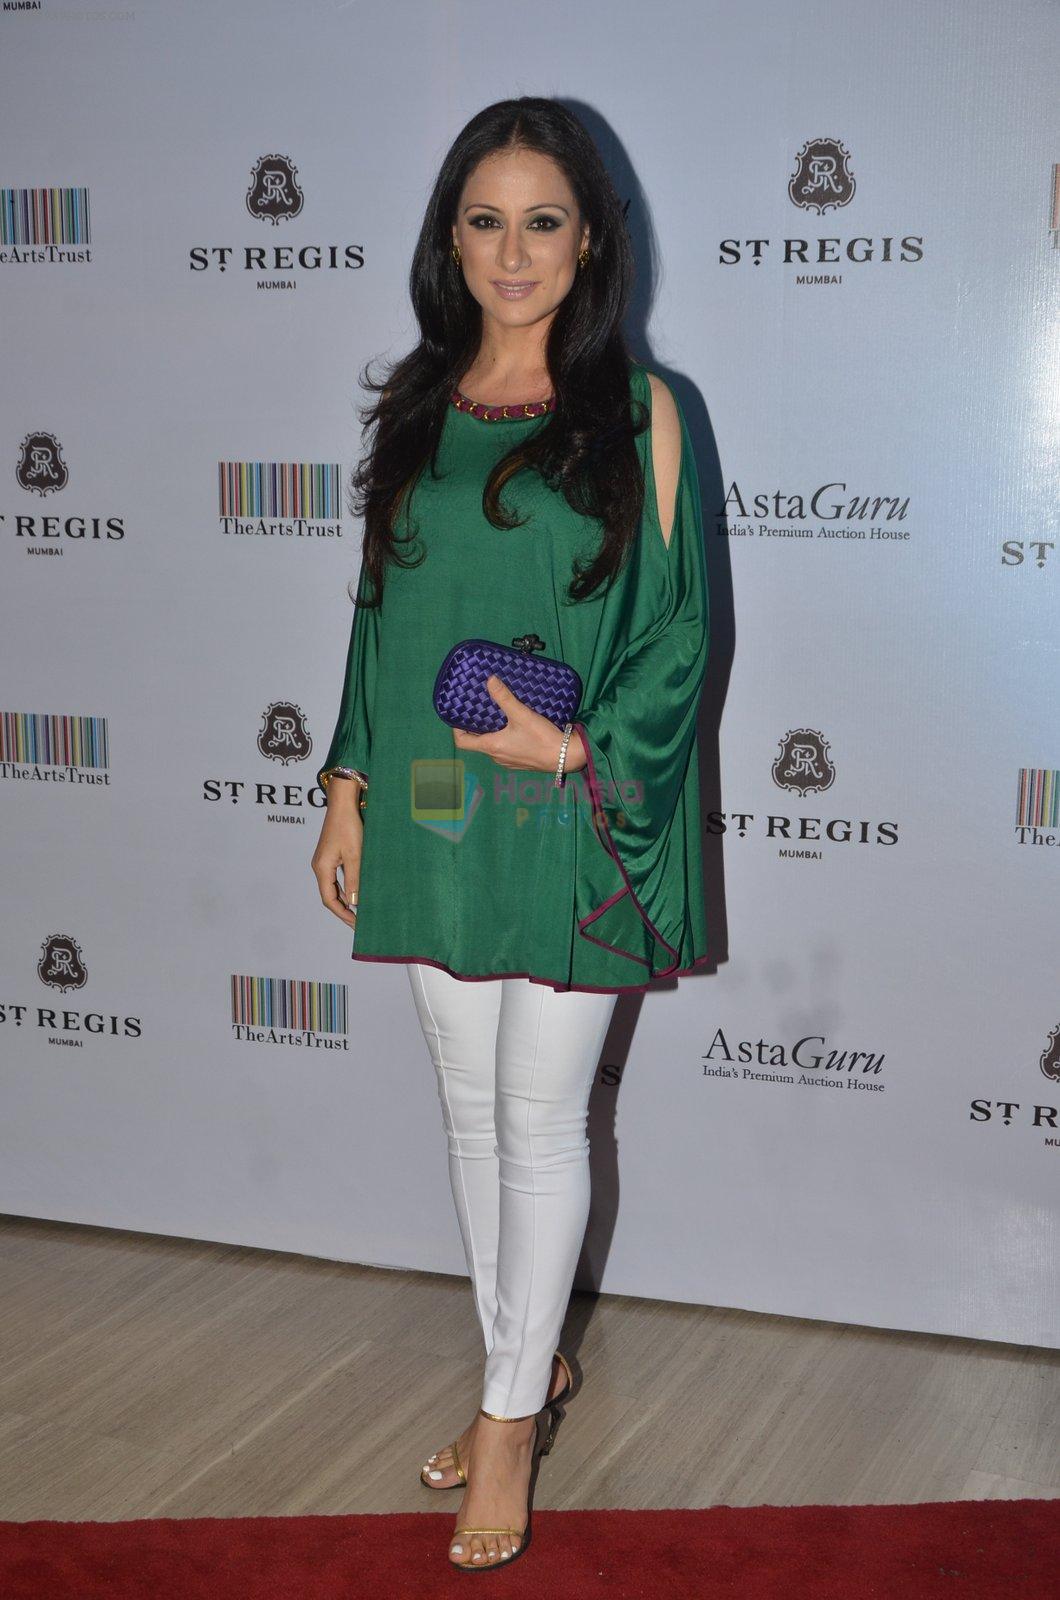 Rouble Nagi at Jogen Chaudhry's art event hosted by Gayatri Ruia and ST Regis on 10th June 2016